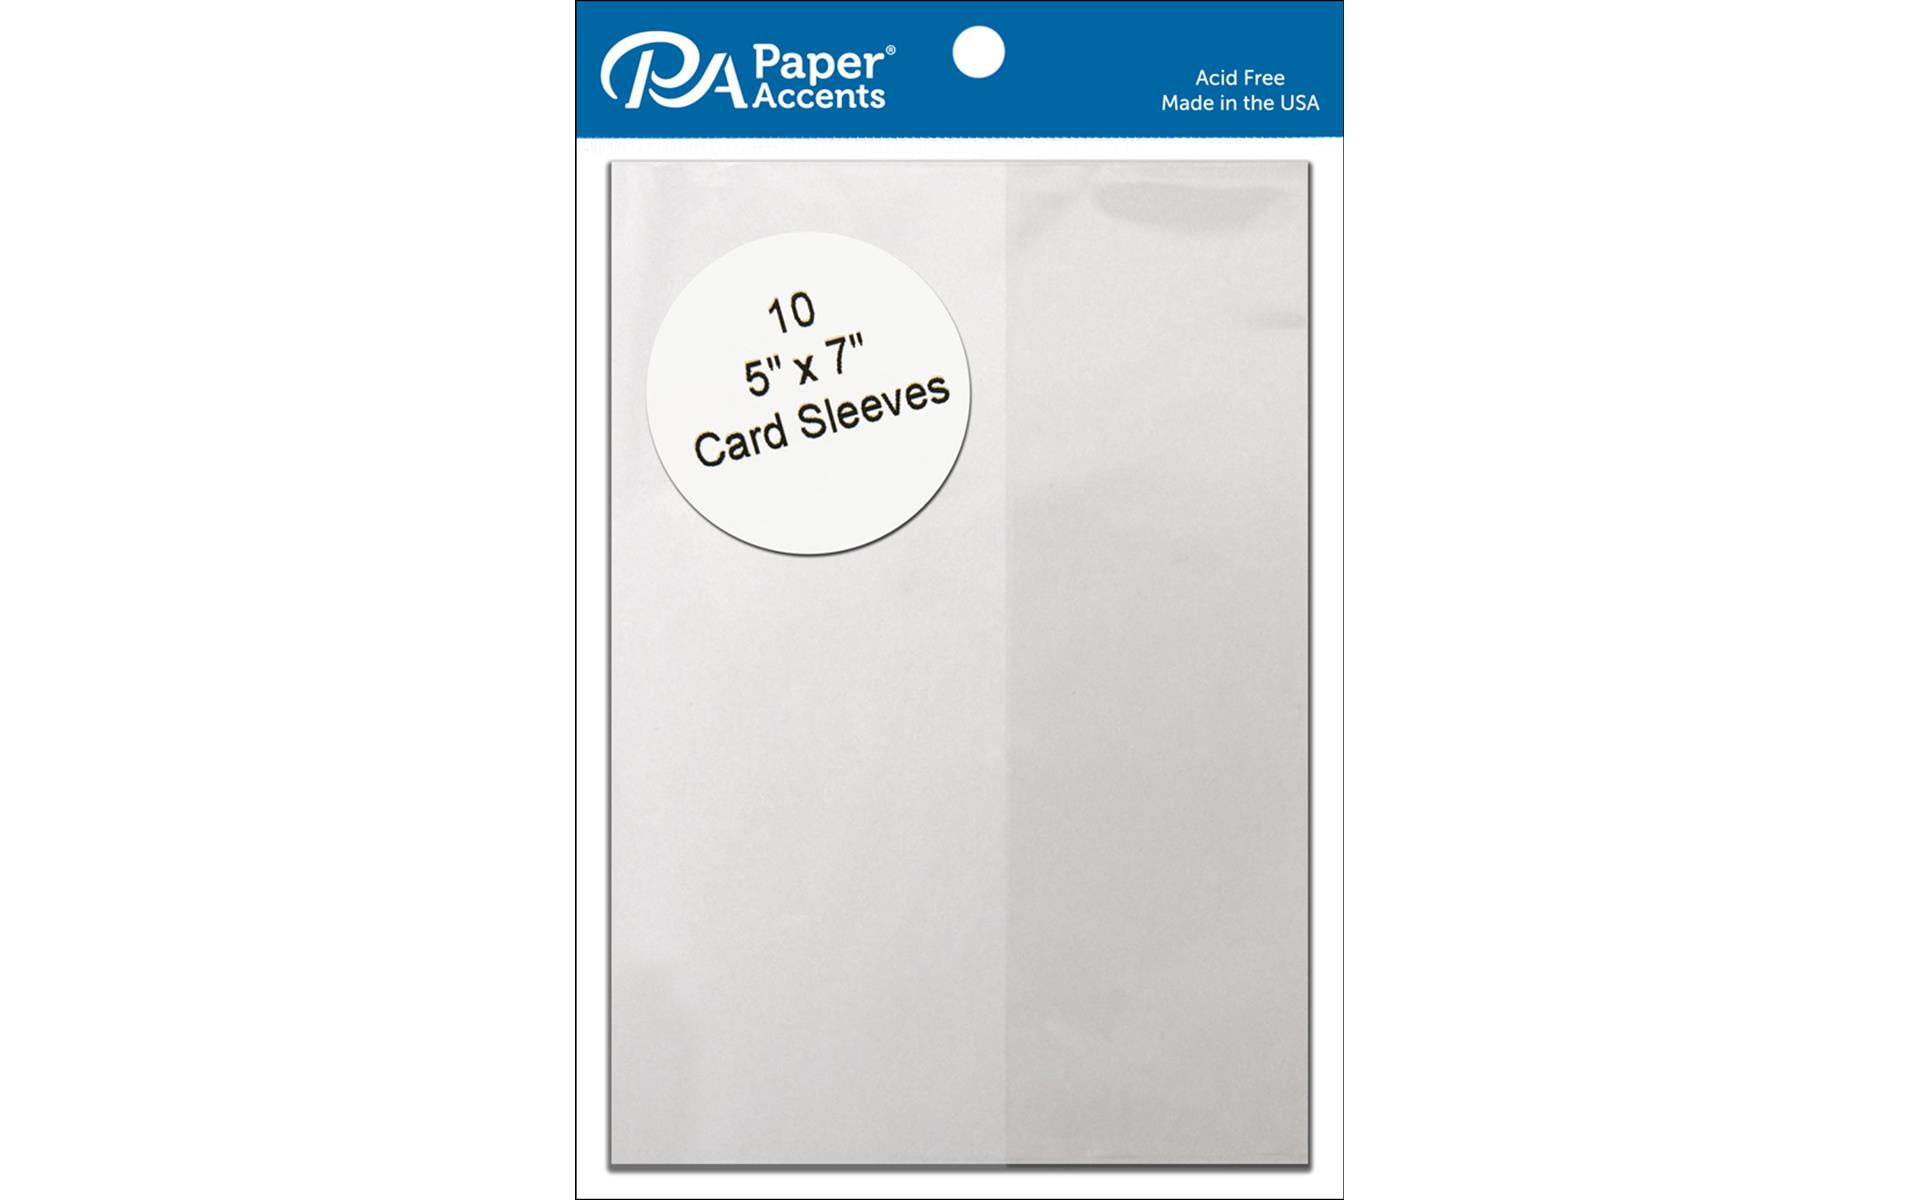 Paper Accents Card Sleeves 5x7 10pc Clear